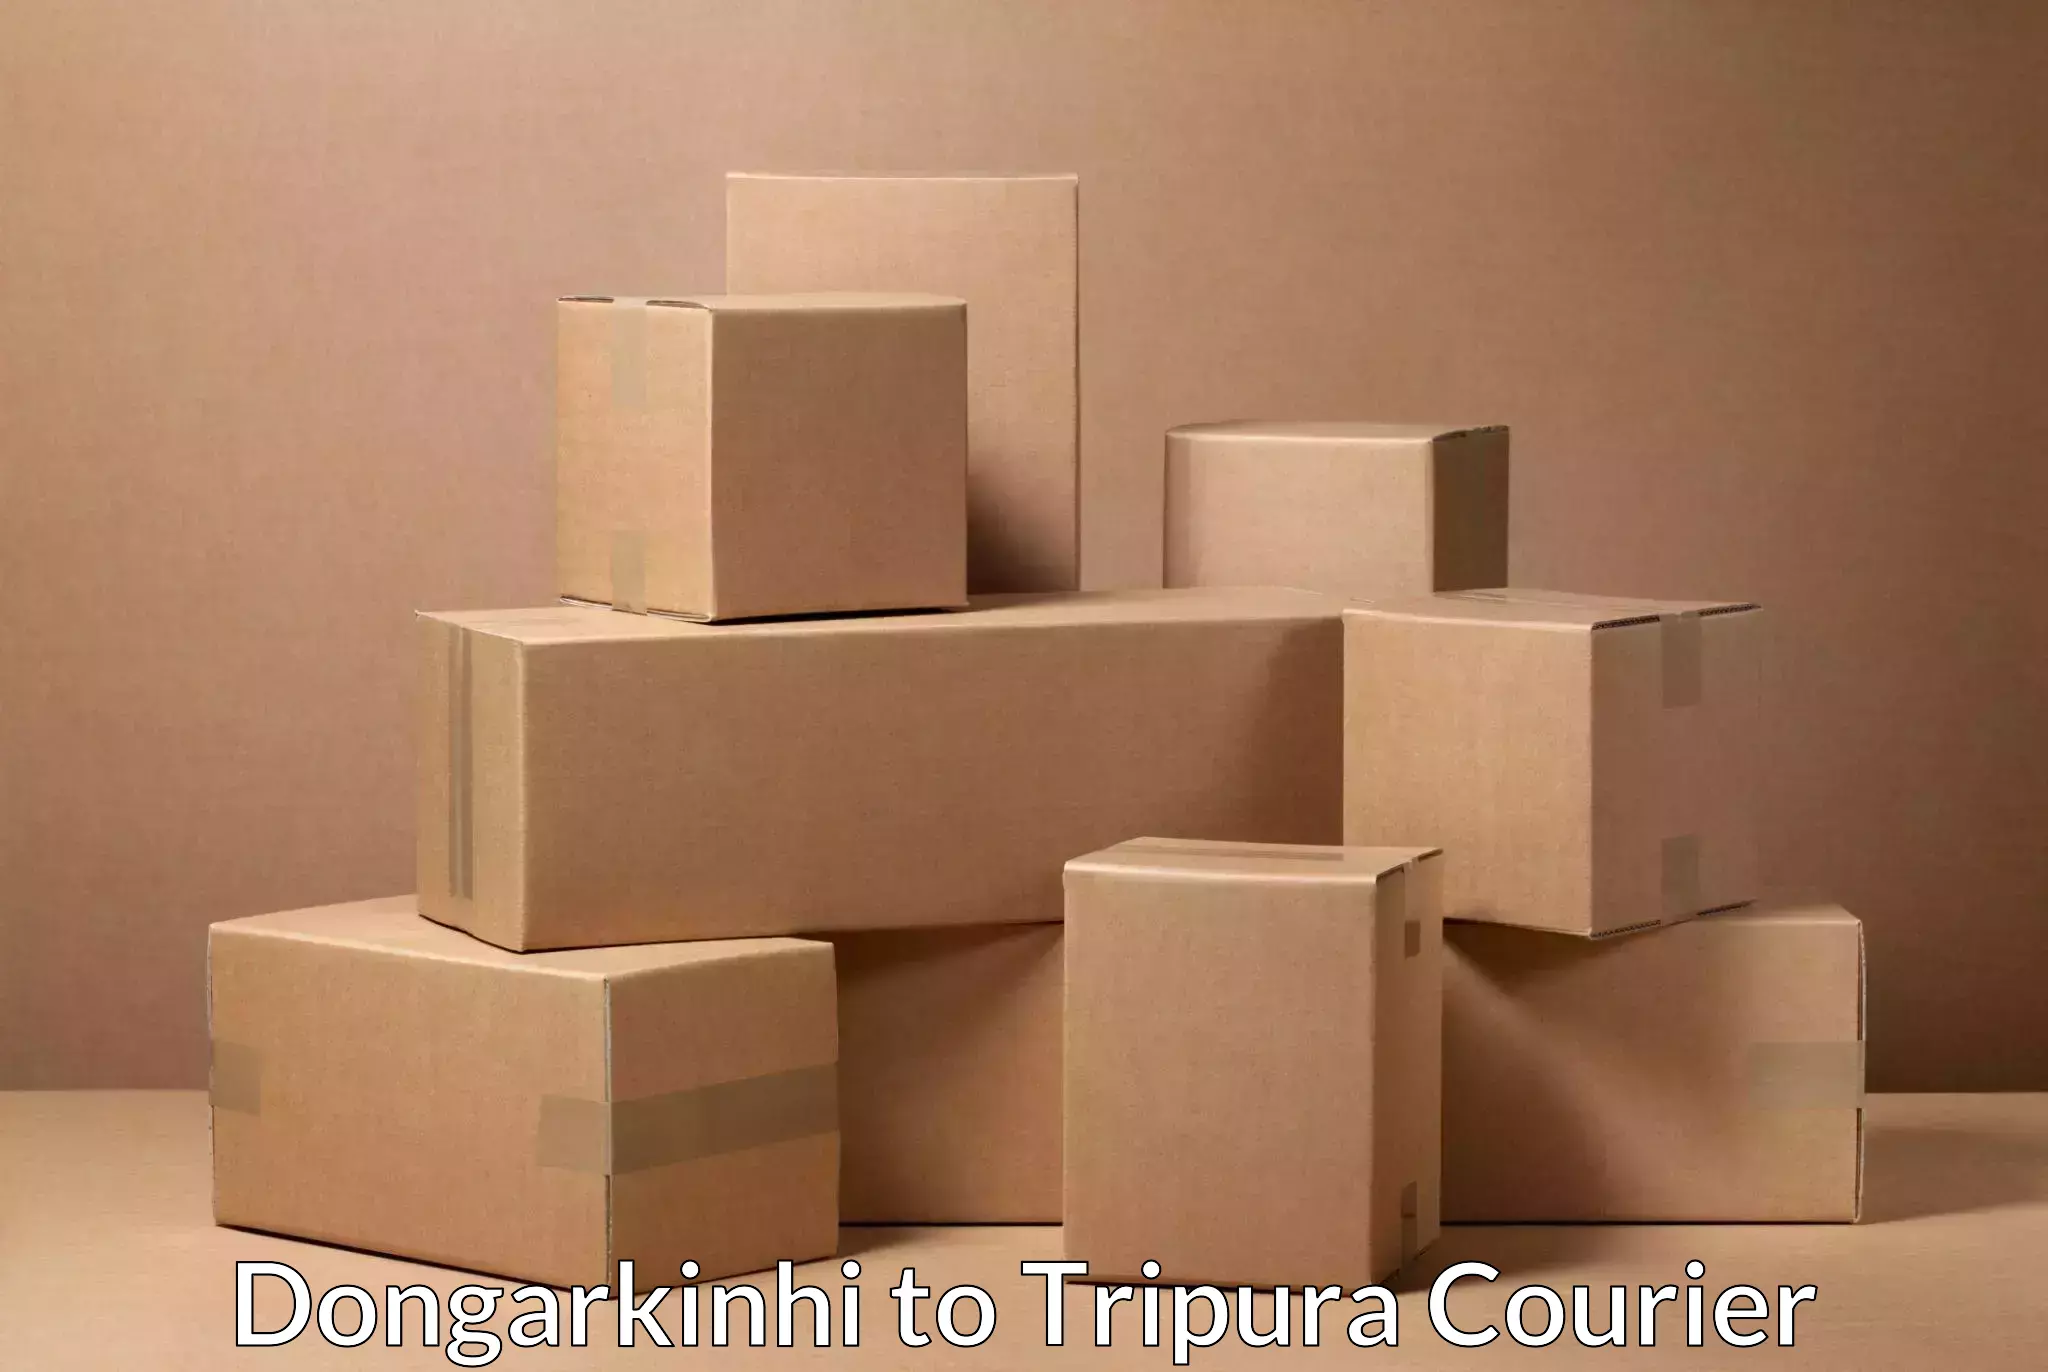 Punctual parcel services Dongarkinhi to Tripura